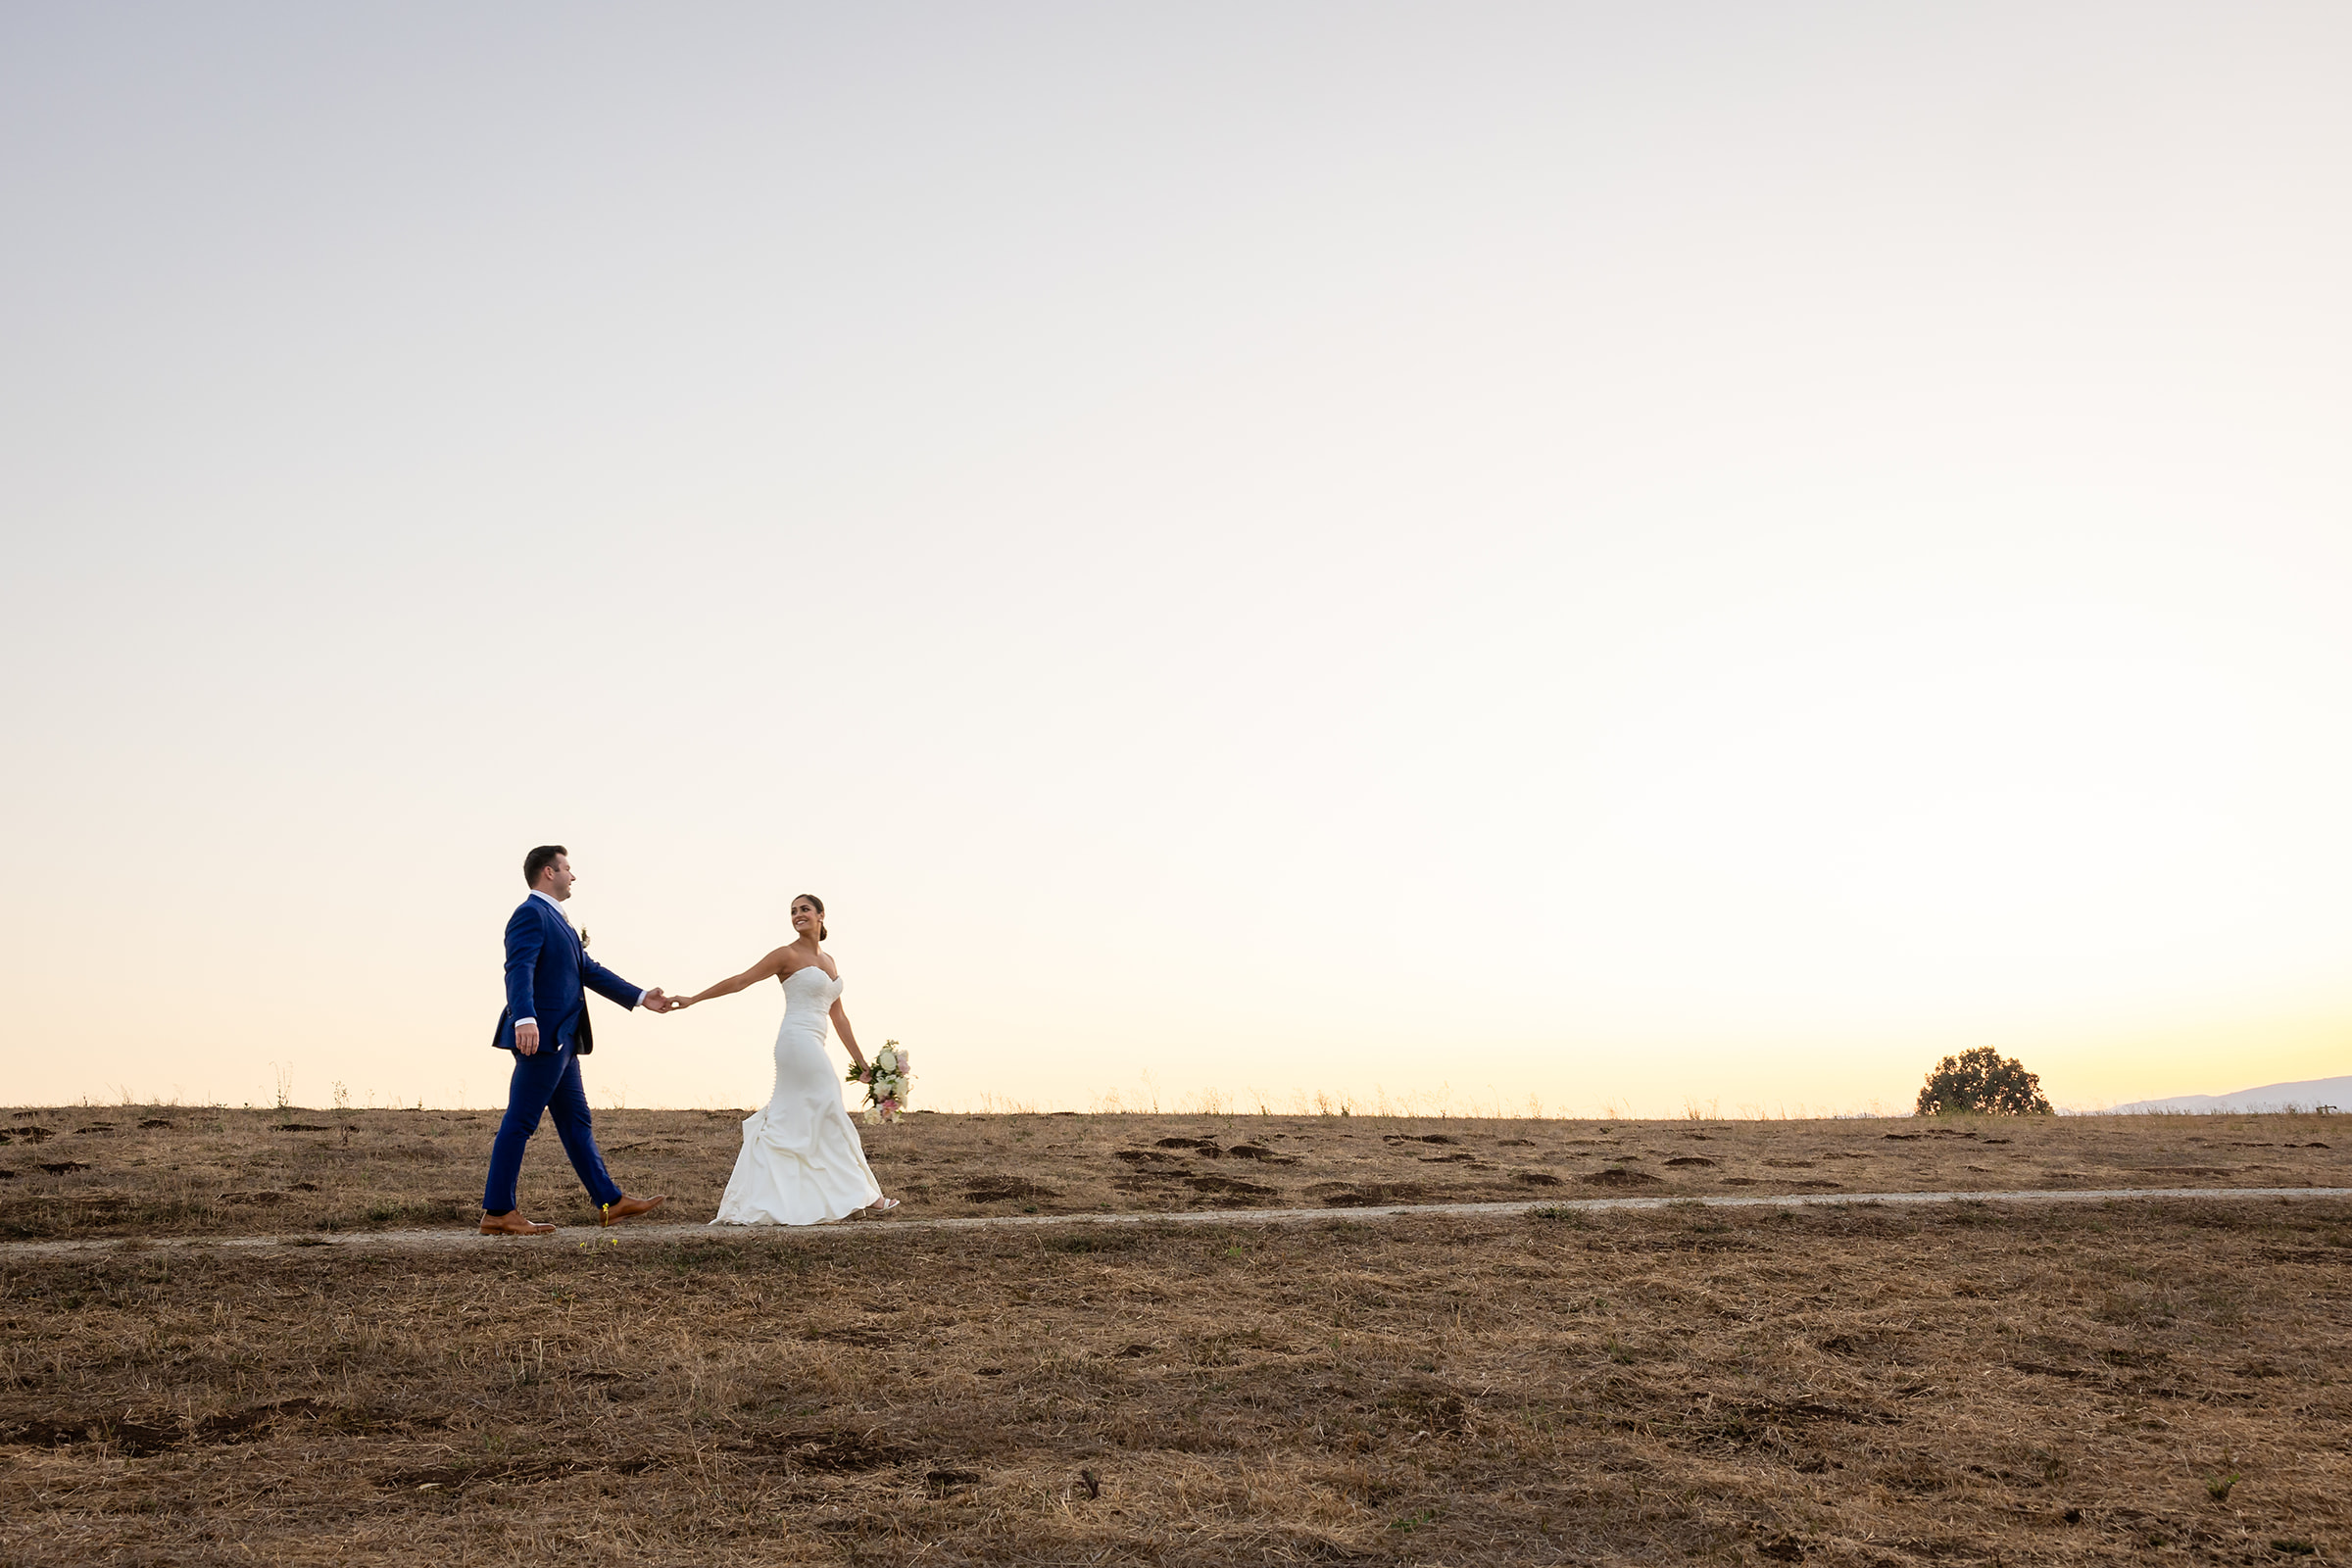 A couple married at Flying Caballos Ranch with iconic landscape views